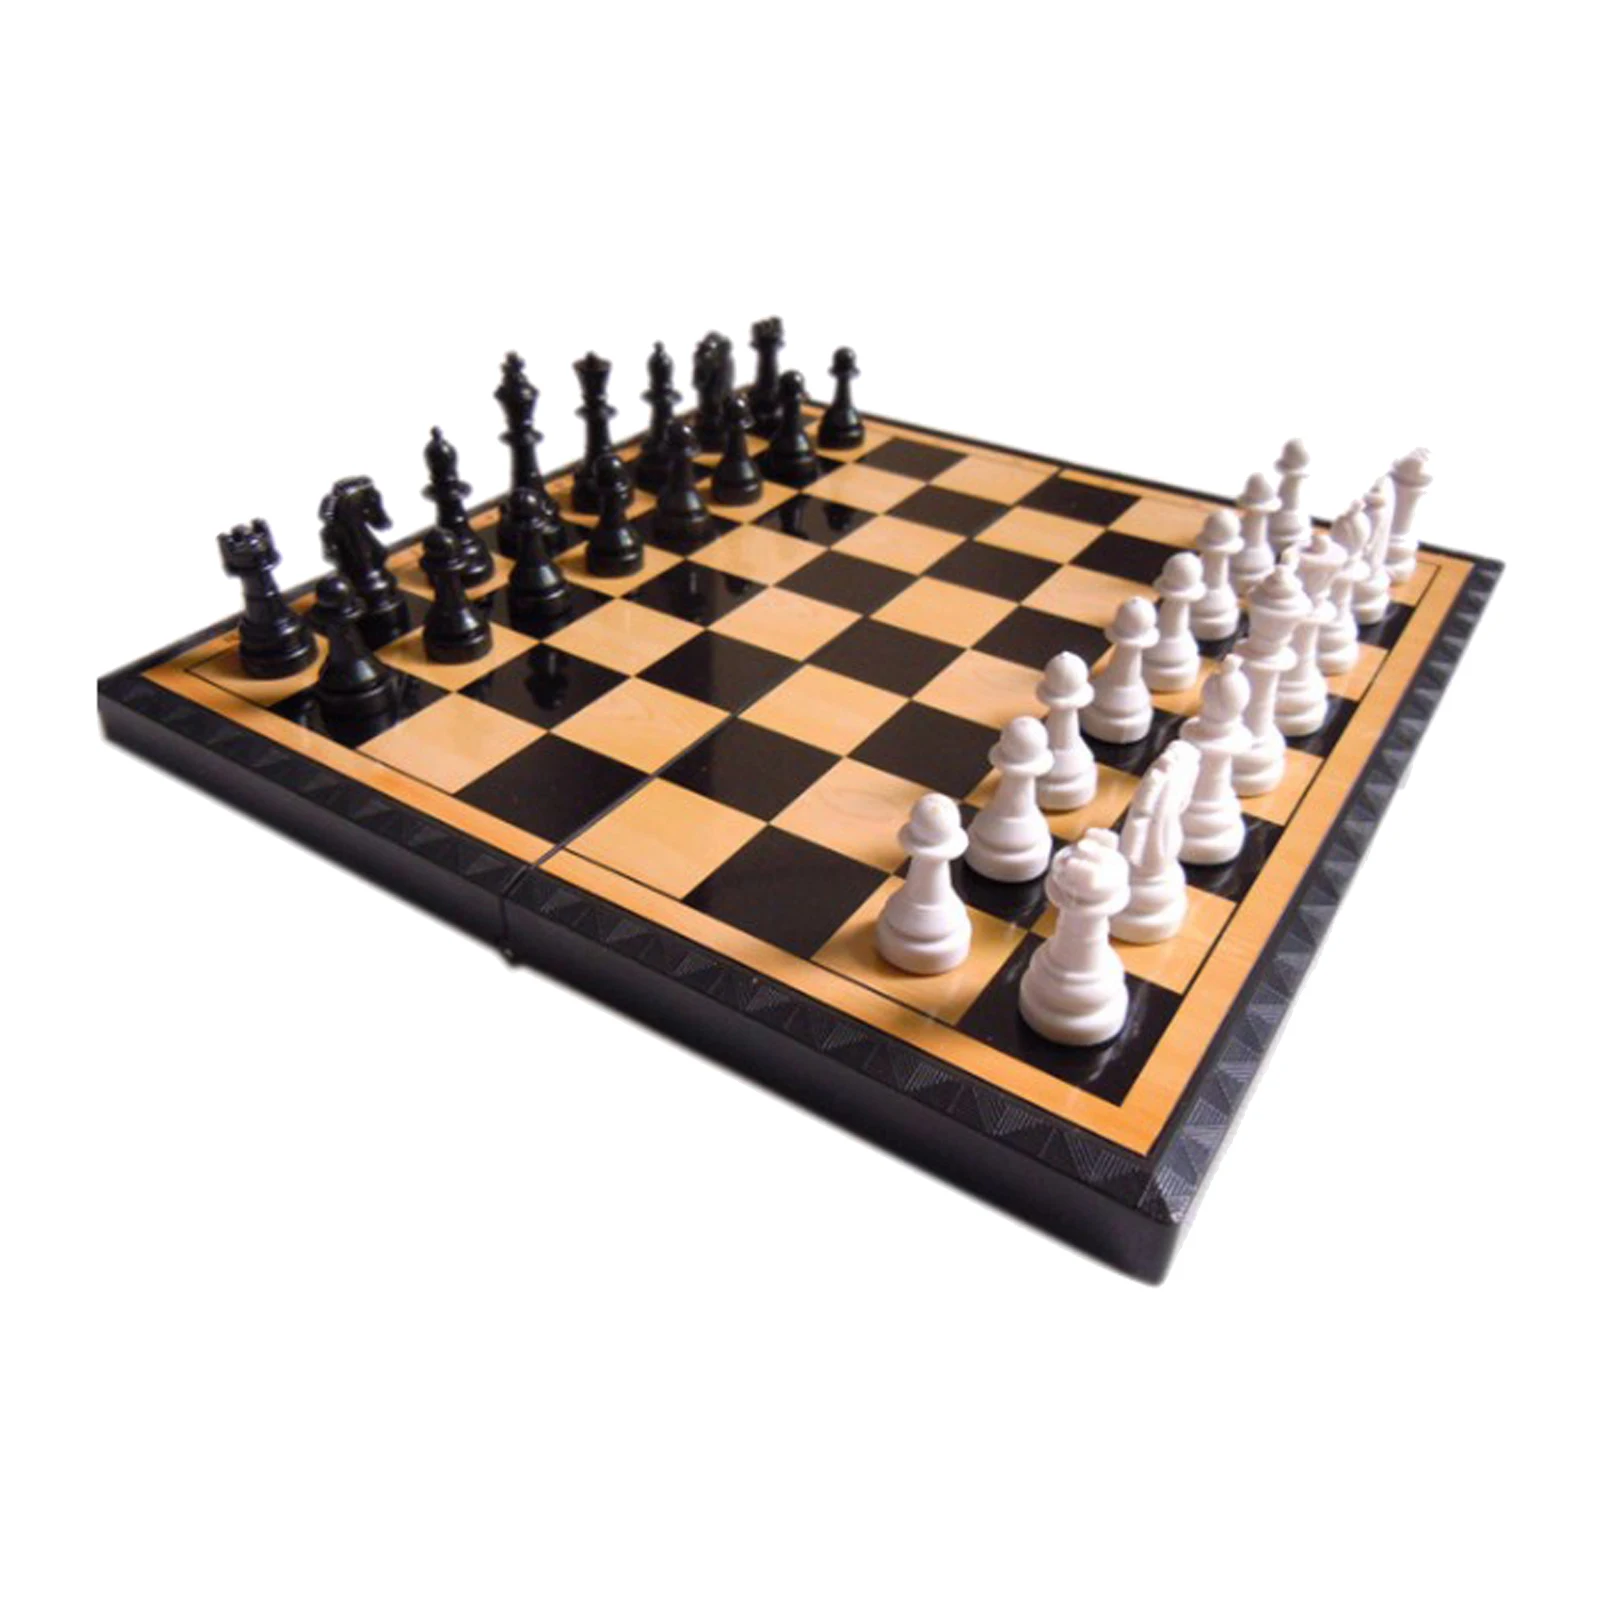 Travel Chess Set Chess Game 2 Players Entertainment Board Game Toys for Adult Kids